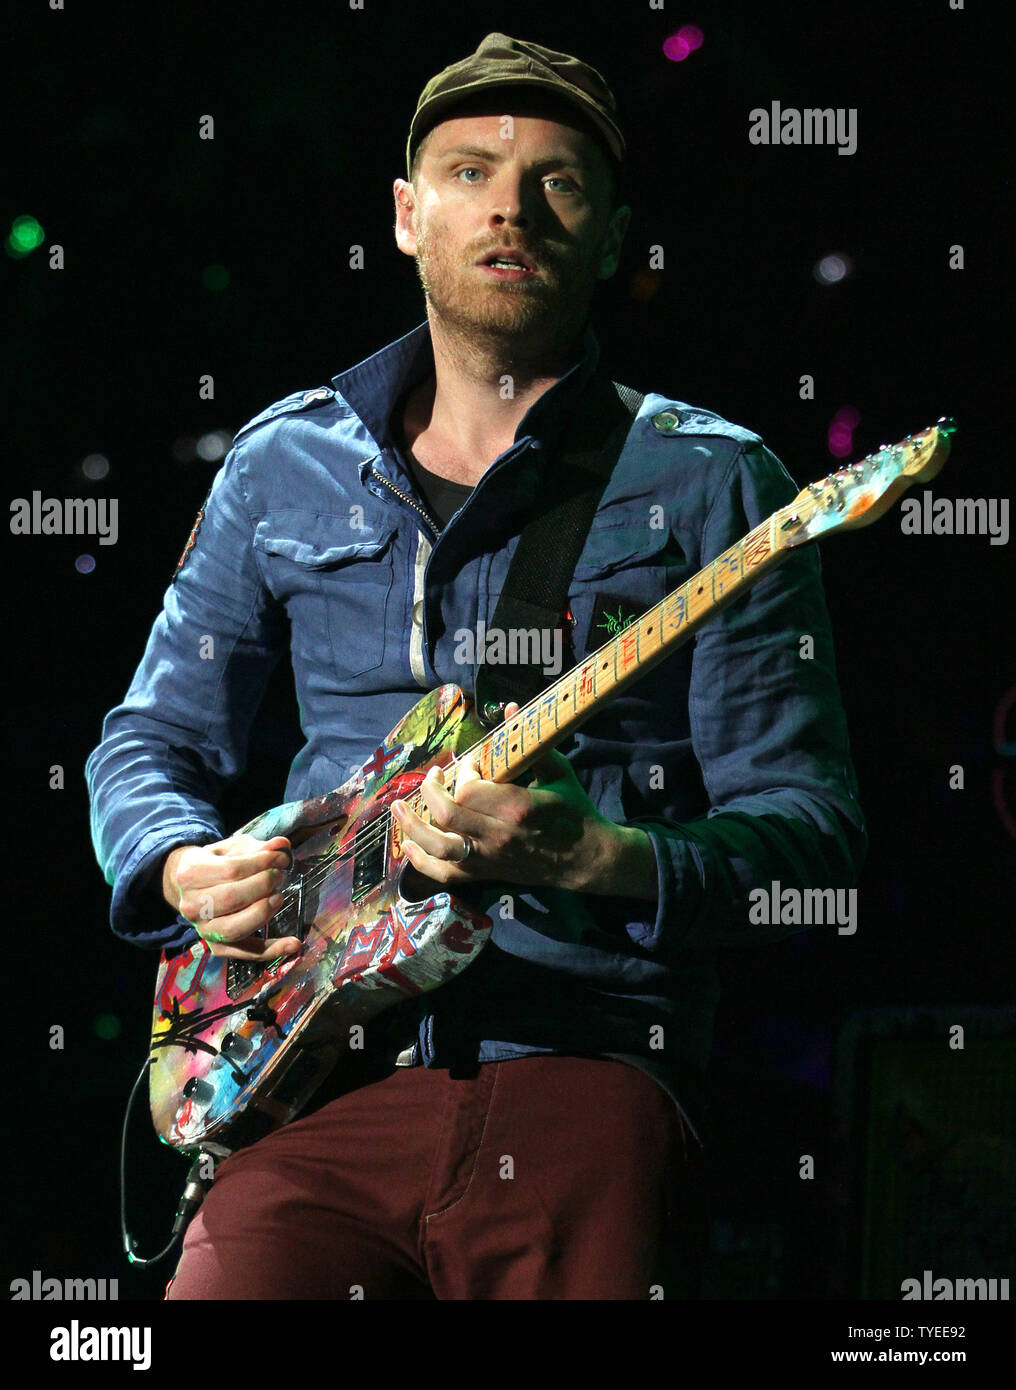 Jonny Buckland with Coldplay performs in concert on their Mylo Xyloto tour 2012 at the American Airlines Arena in Miami on June 29, 2012. UPI/Michael Bush Stock Photo